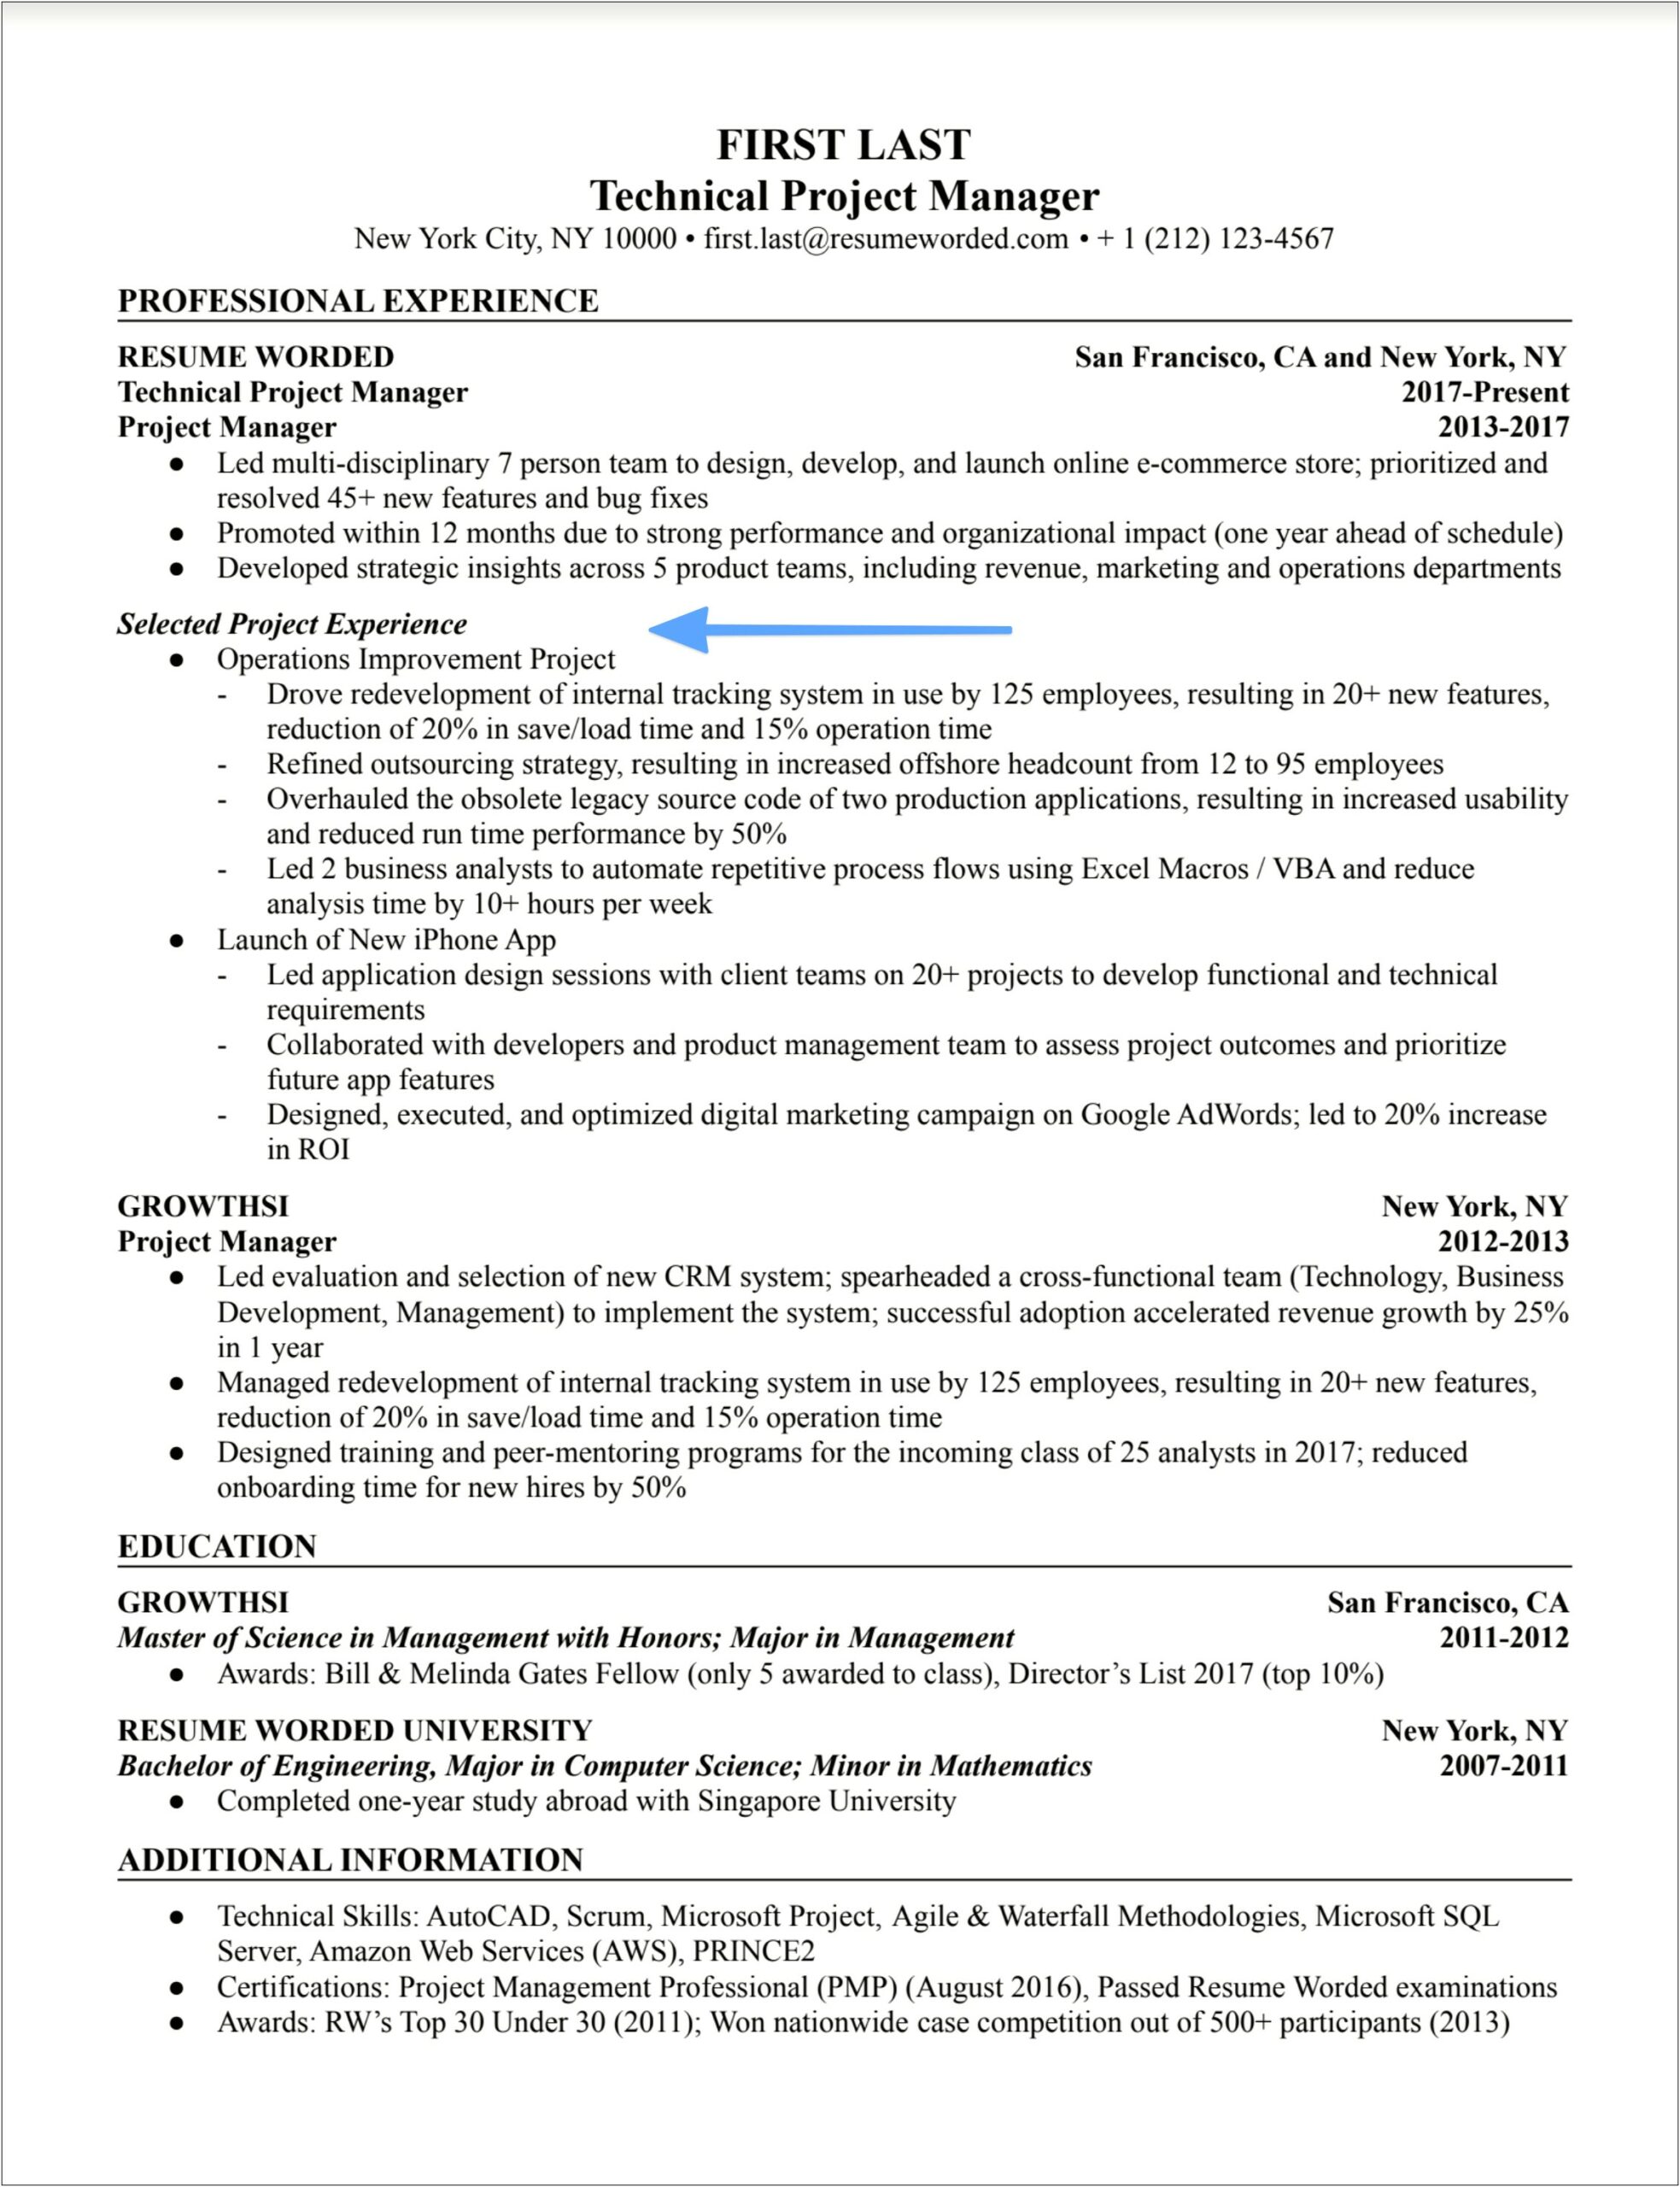 Best Construction Project Manager Resume Sample